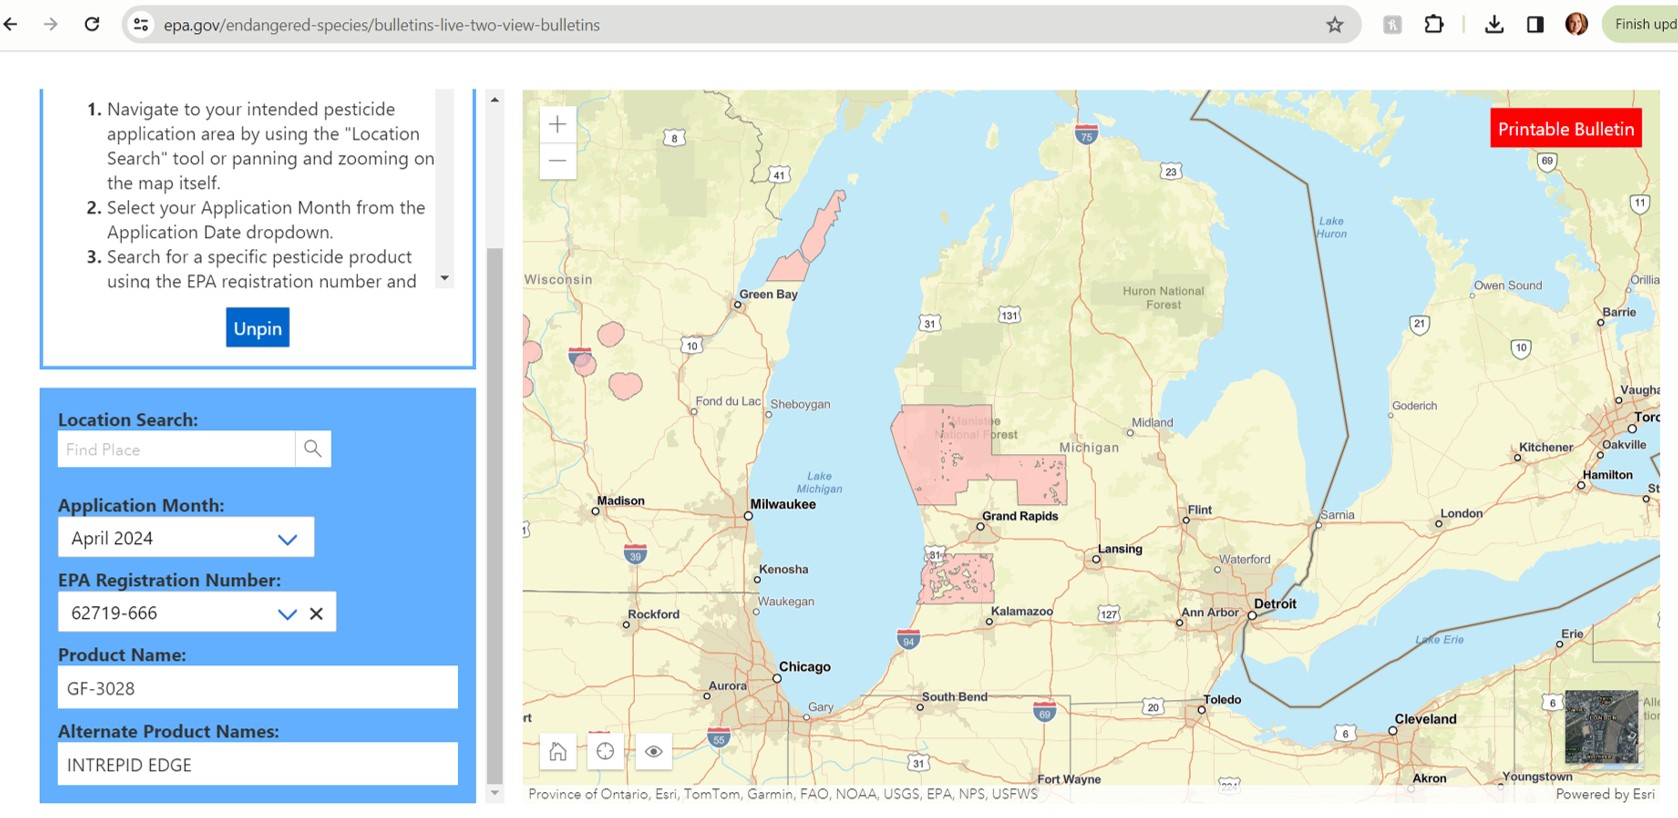 Screenshot of Bulletins Live Two website showing map of Michigan with pink areas highlighted.